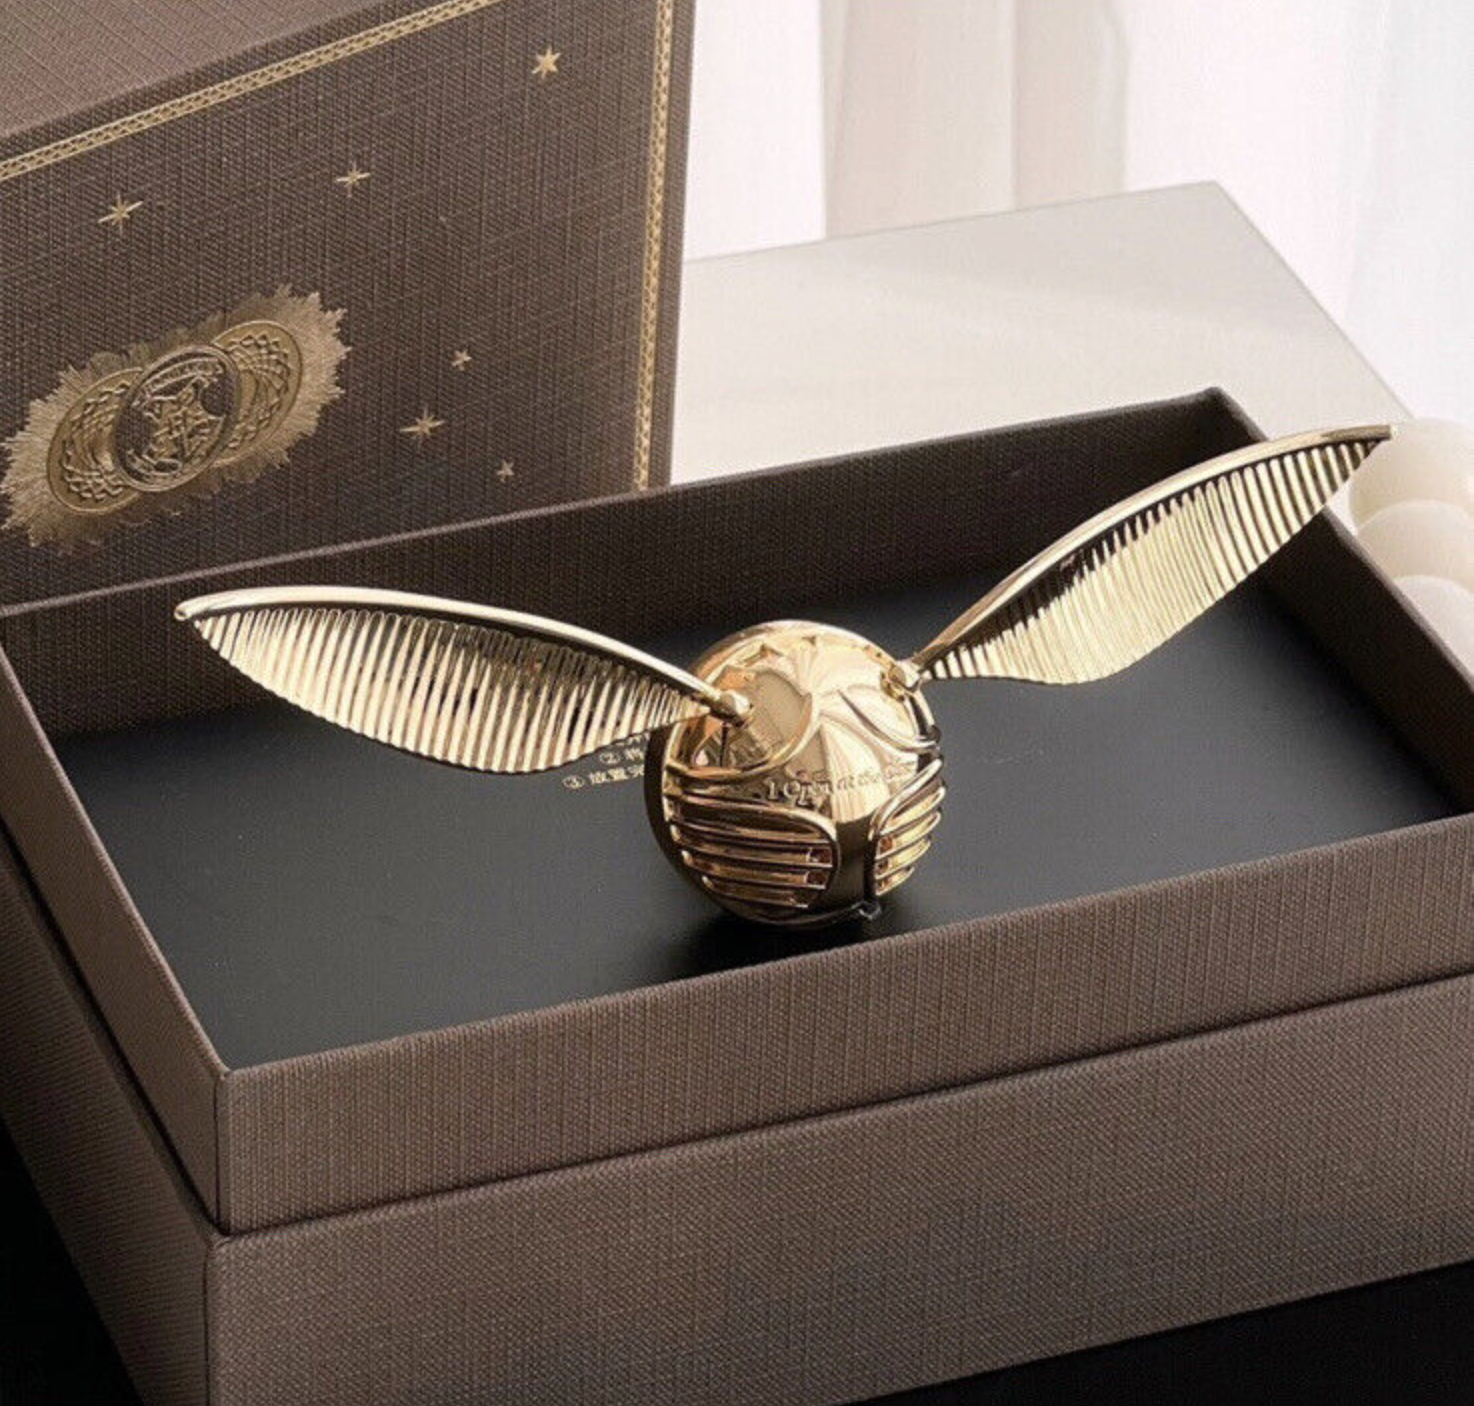 The Golden Snitch Ring Box 18K Yellow Gold